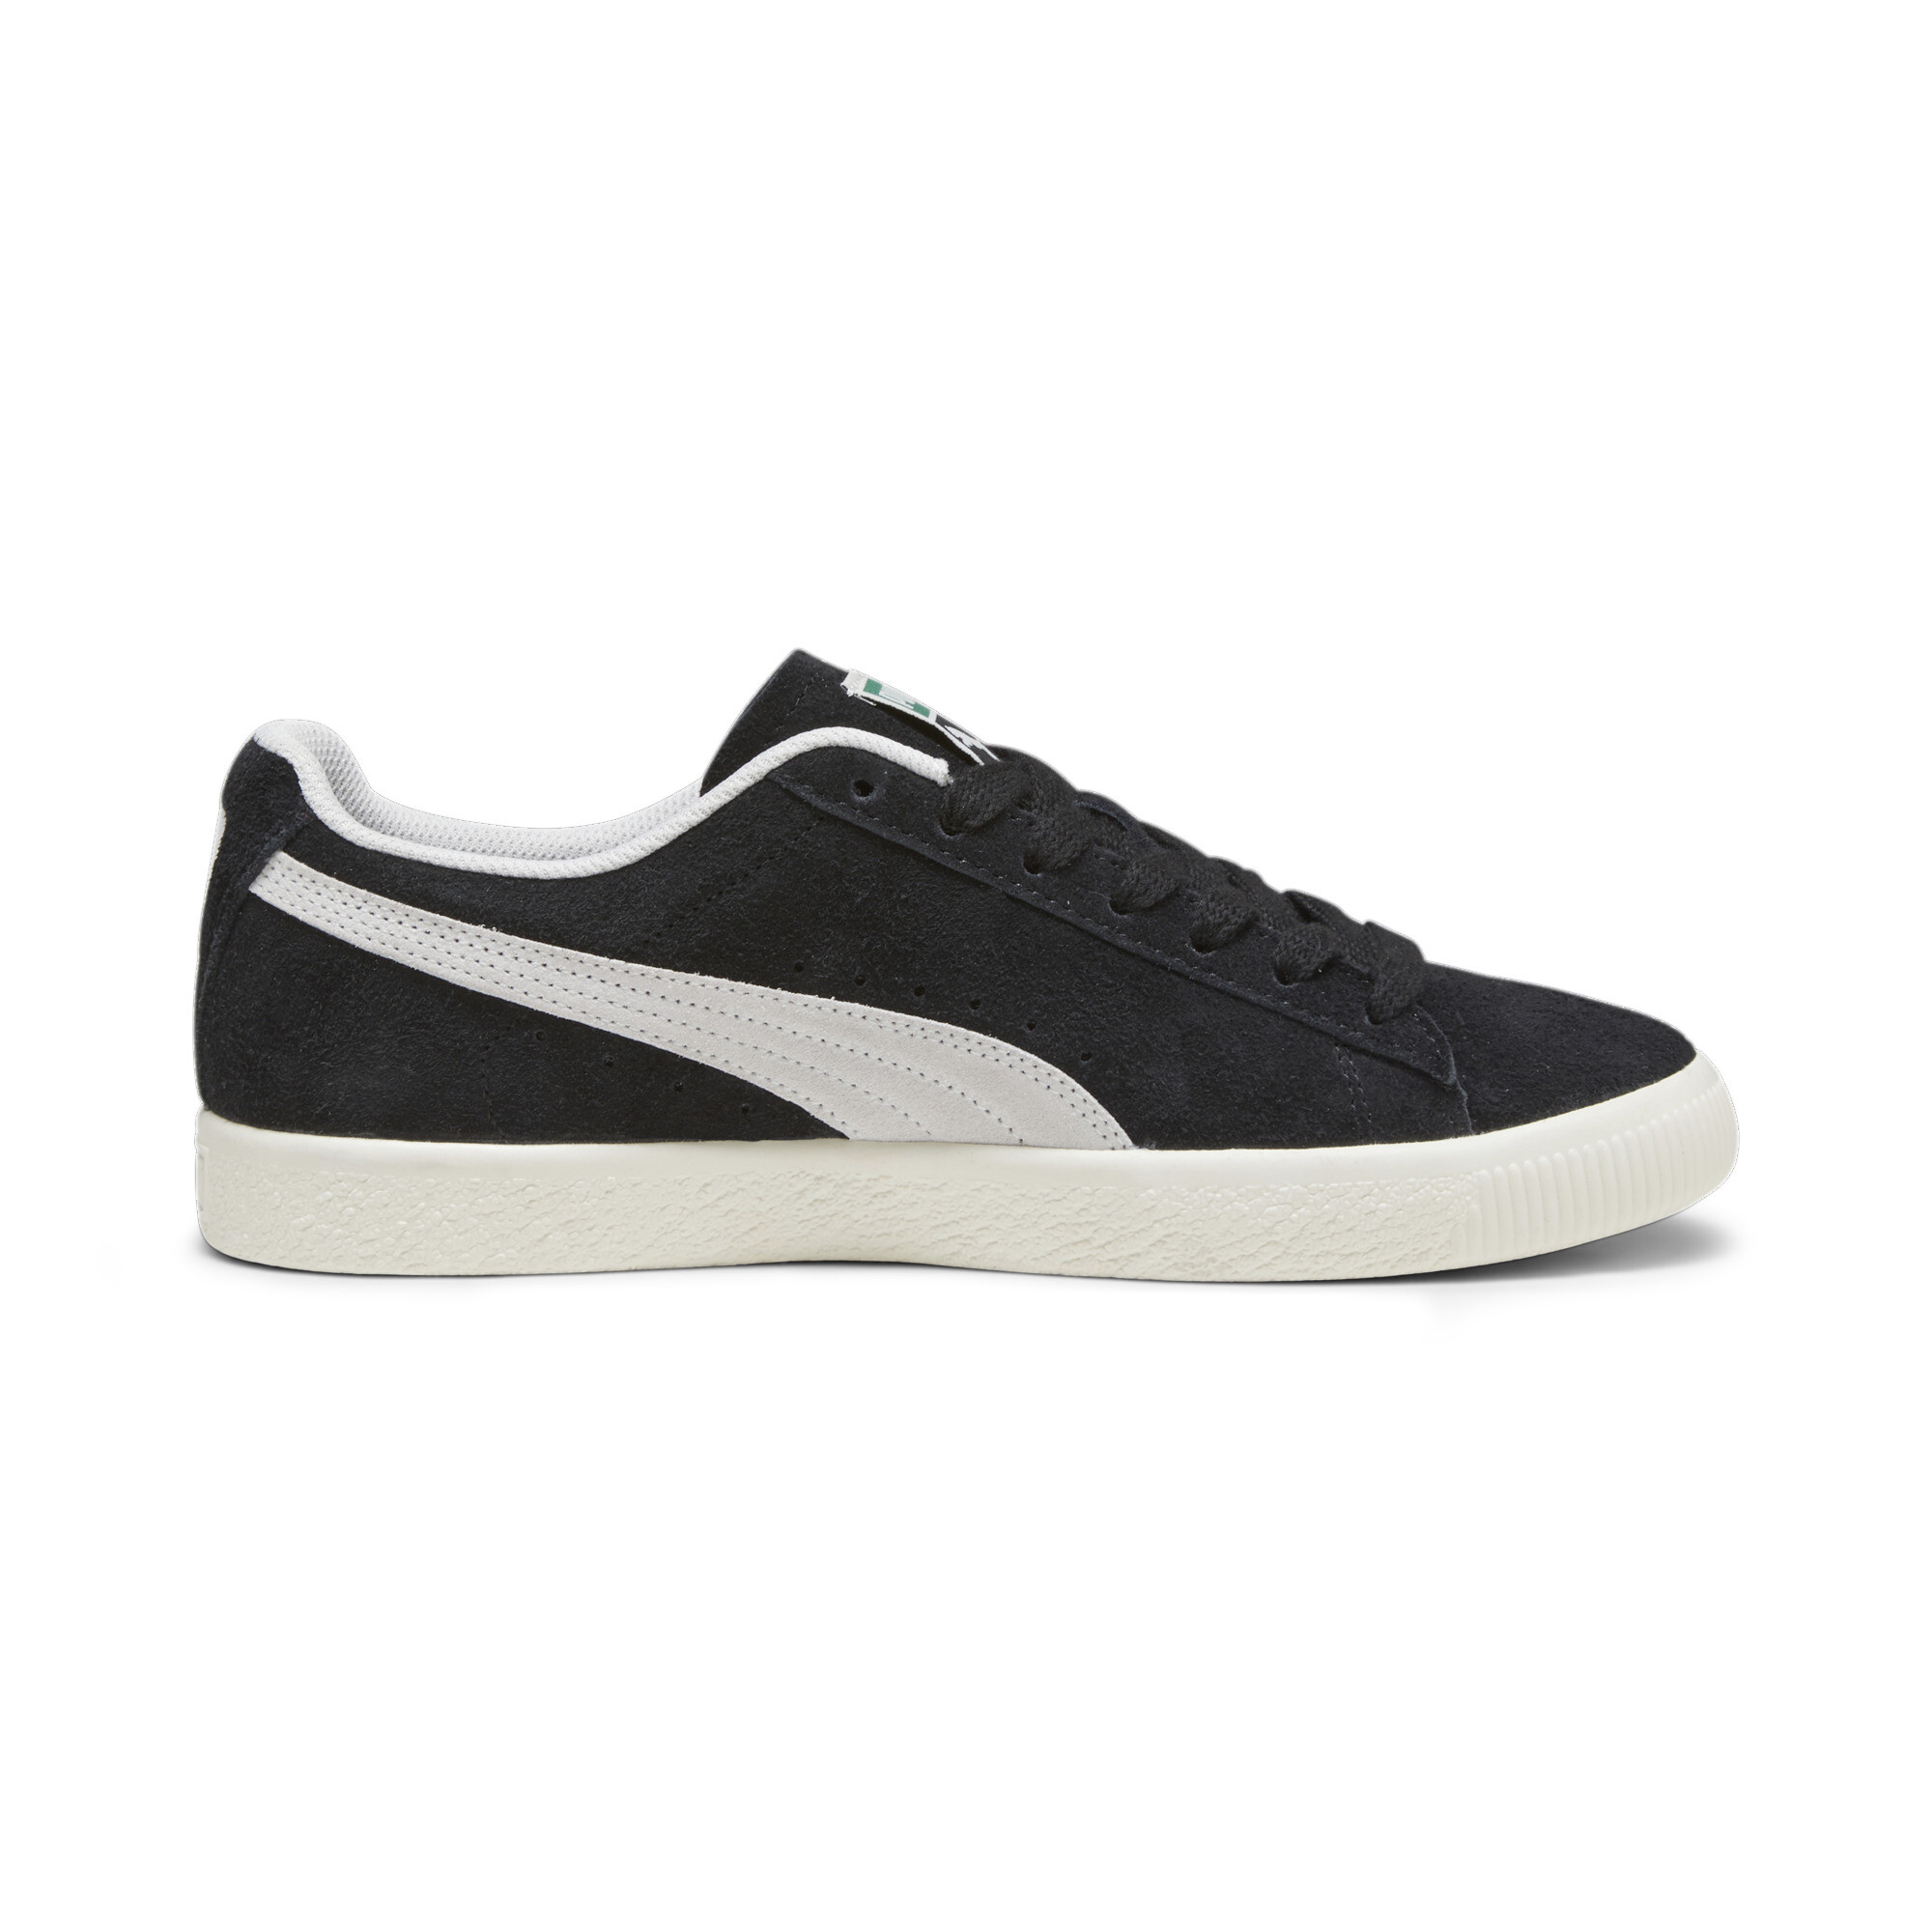 Men's PUMA Clyde Hairy Suede Sneakers In 10 - Black, Size EU 45